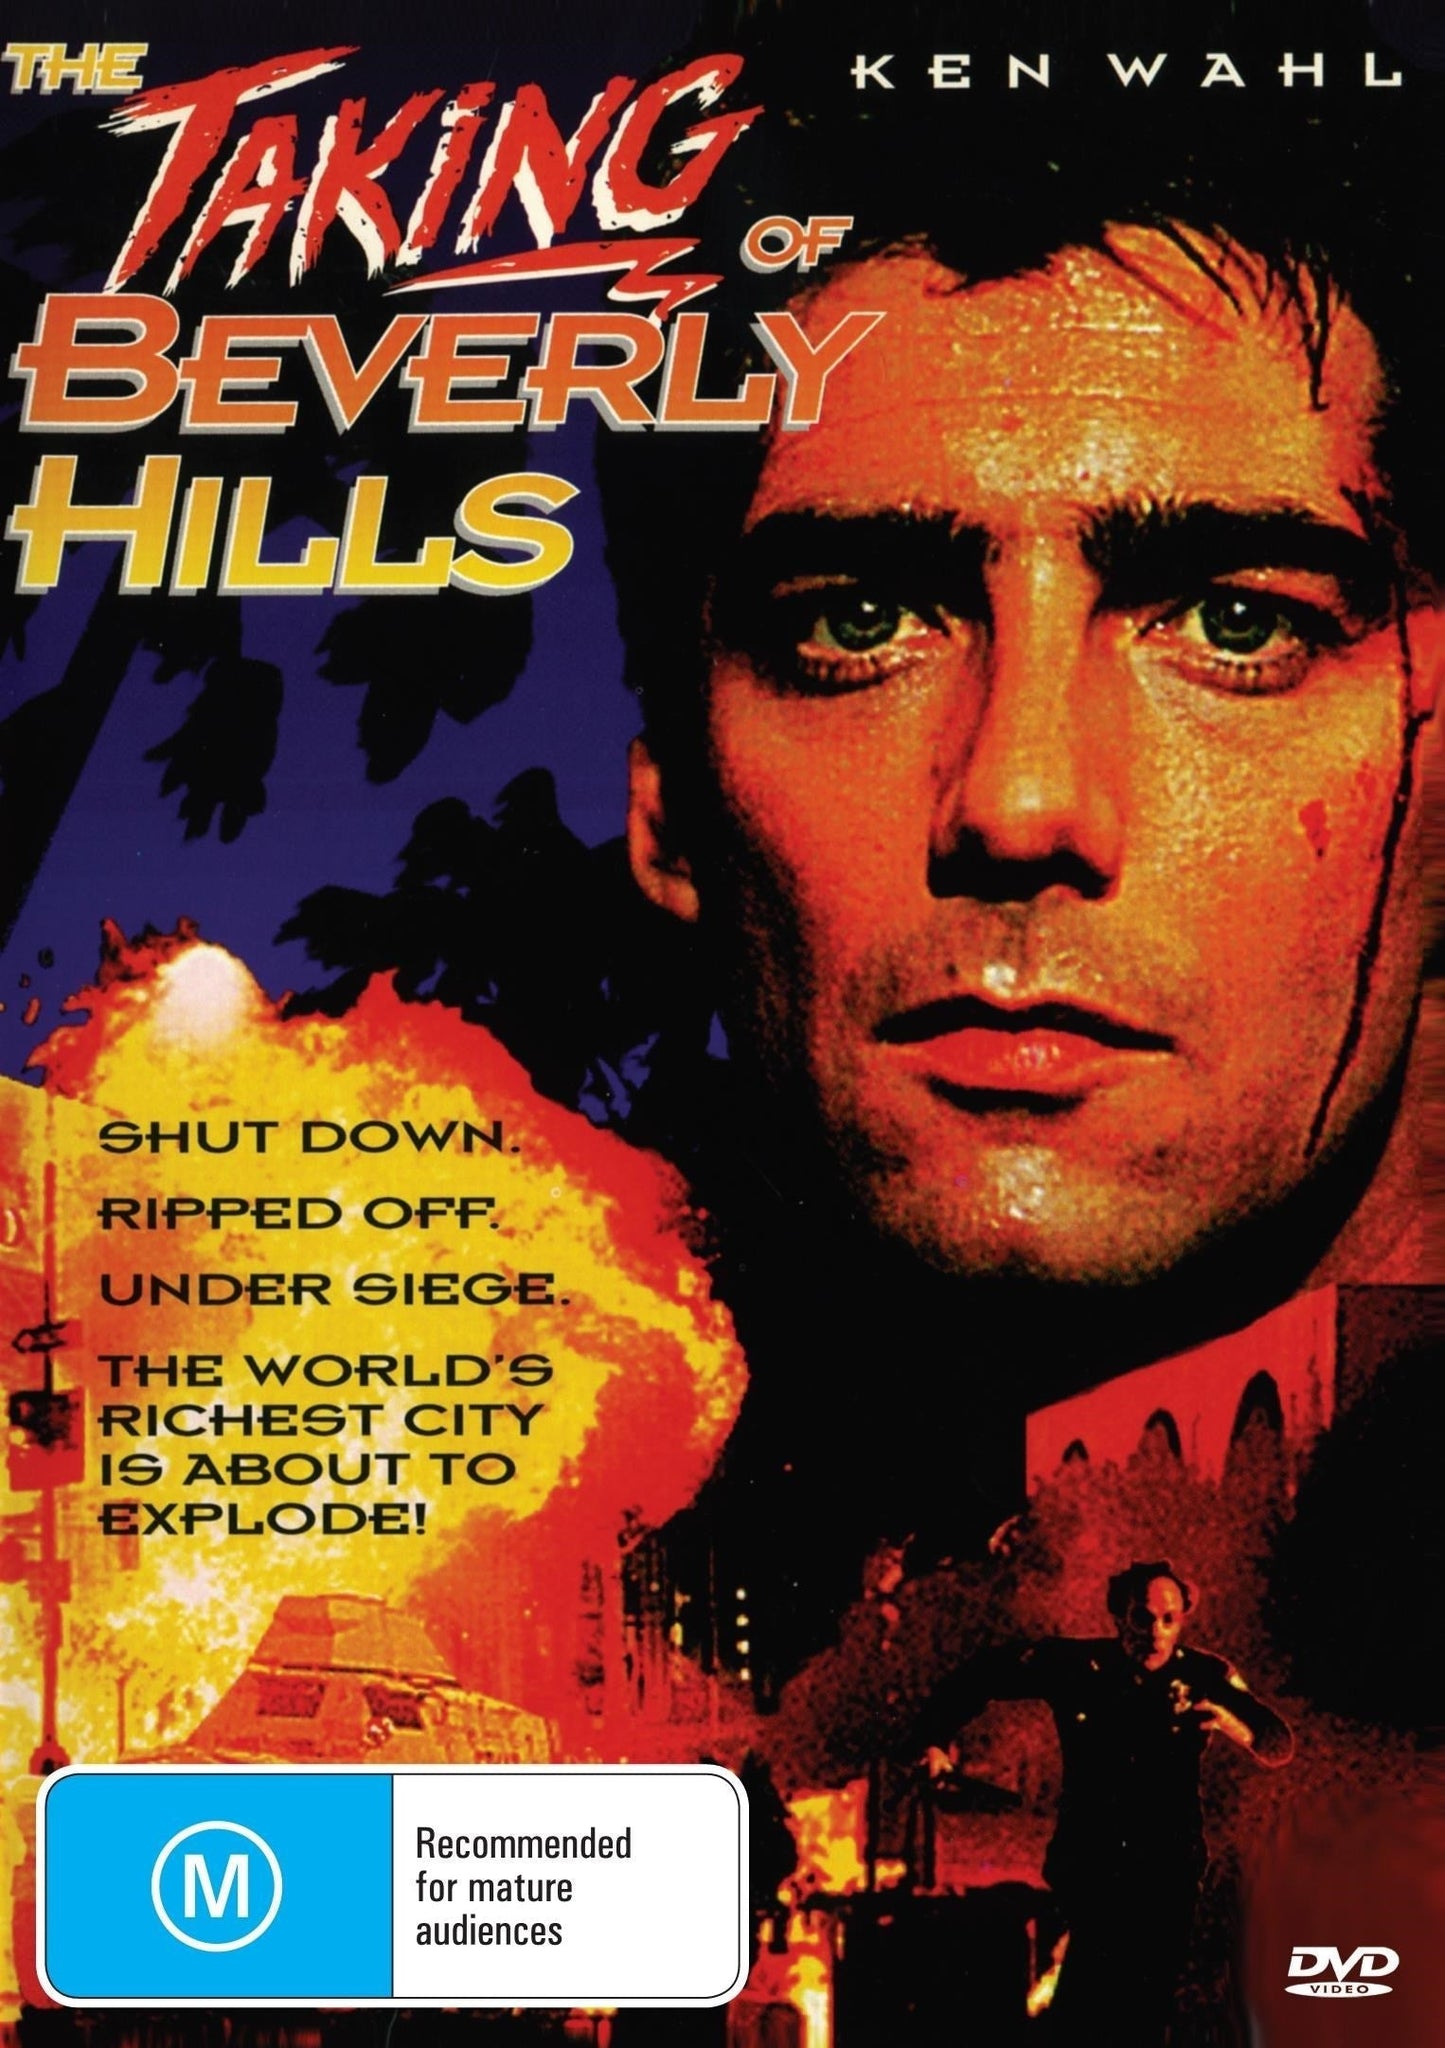 The Taking Of Beverly Hills rareandcollectibledvds